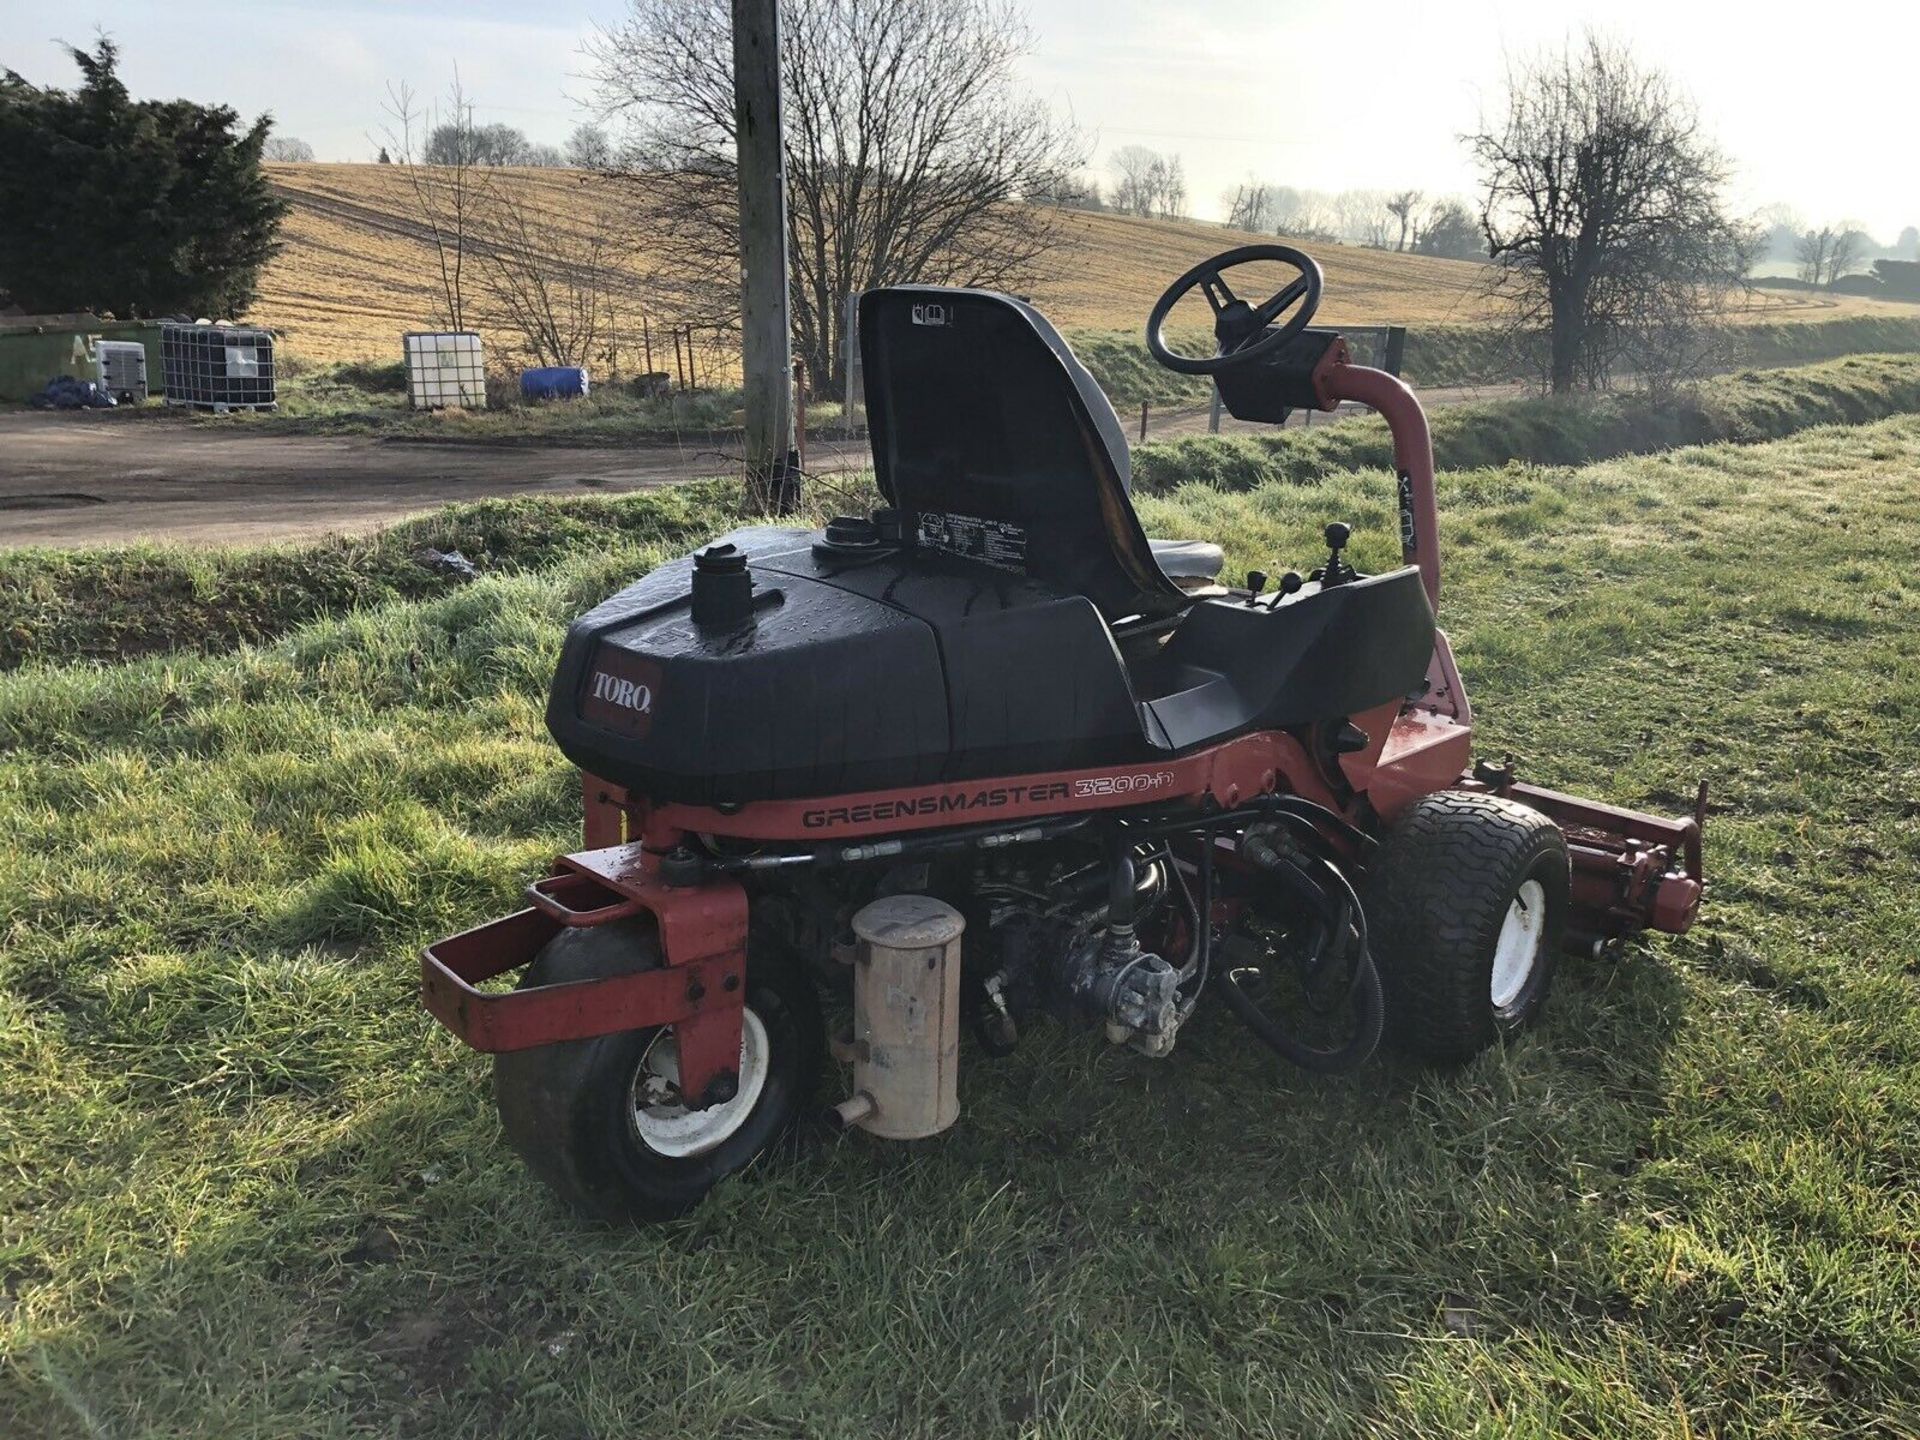 TORO 3200 DIESEL RIDE ON LAWN MOWER, HYDROSTATIC DRIVE, VERY SHARP TURNING CIRCLE, COLLECTION BOXES - Image 2 of 5